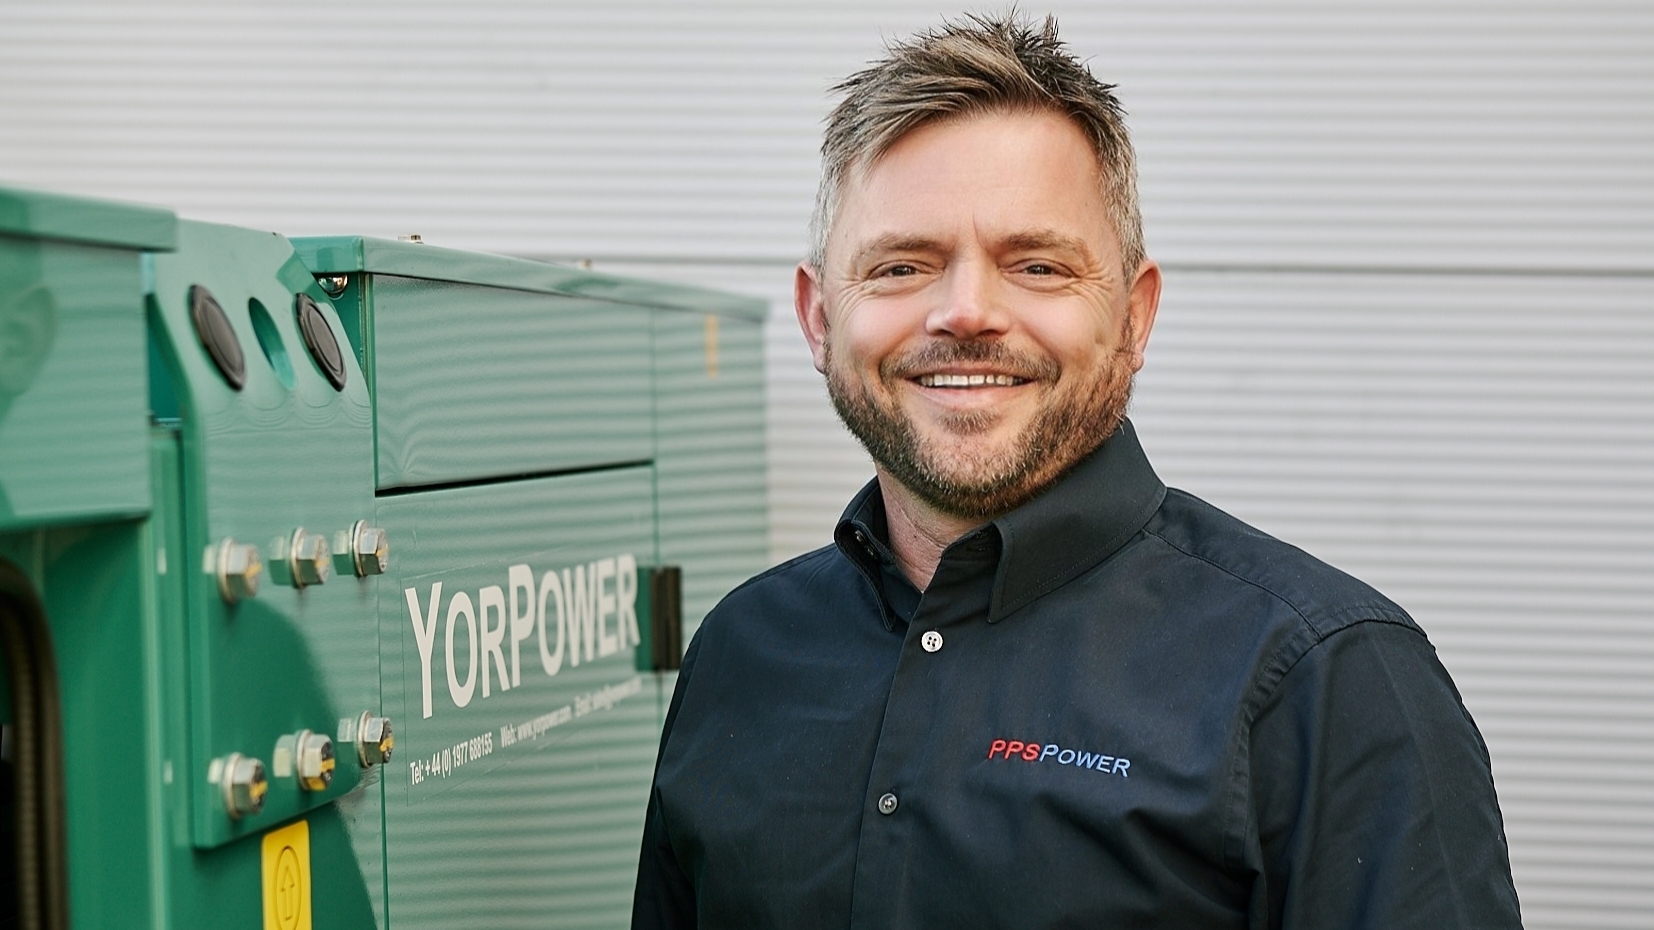 PPSPower and YorPower Join Forces Under Stephen Peal